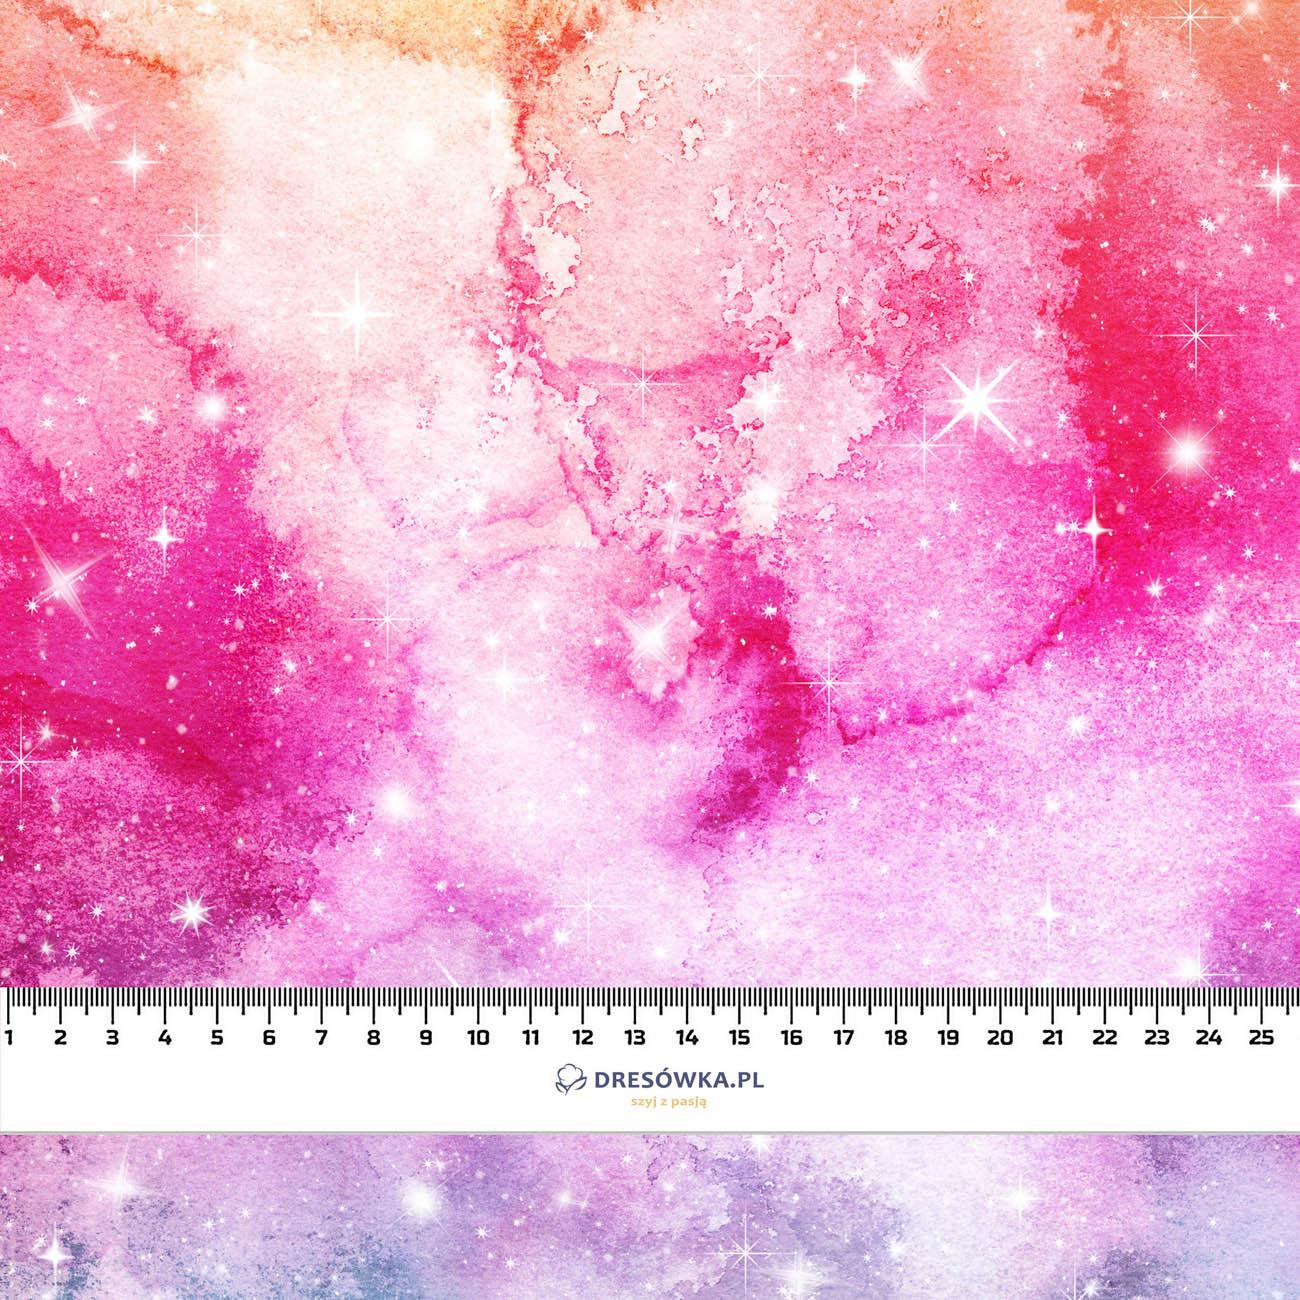 WATERCOLOR GALAXY PAT. 1 - brushed knit fabric with teddy / alpine fleece